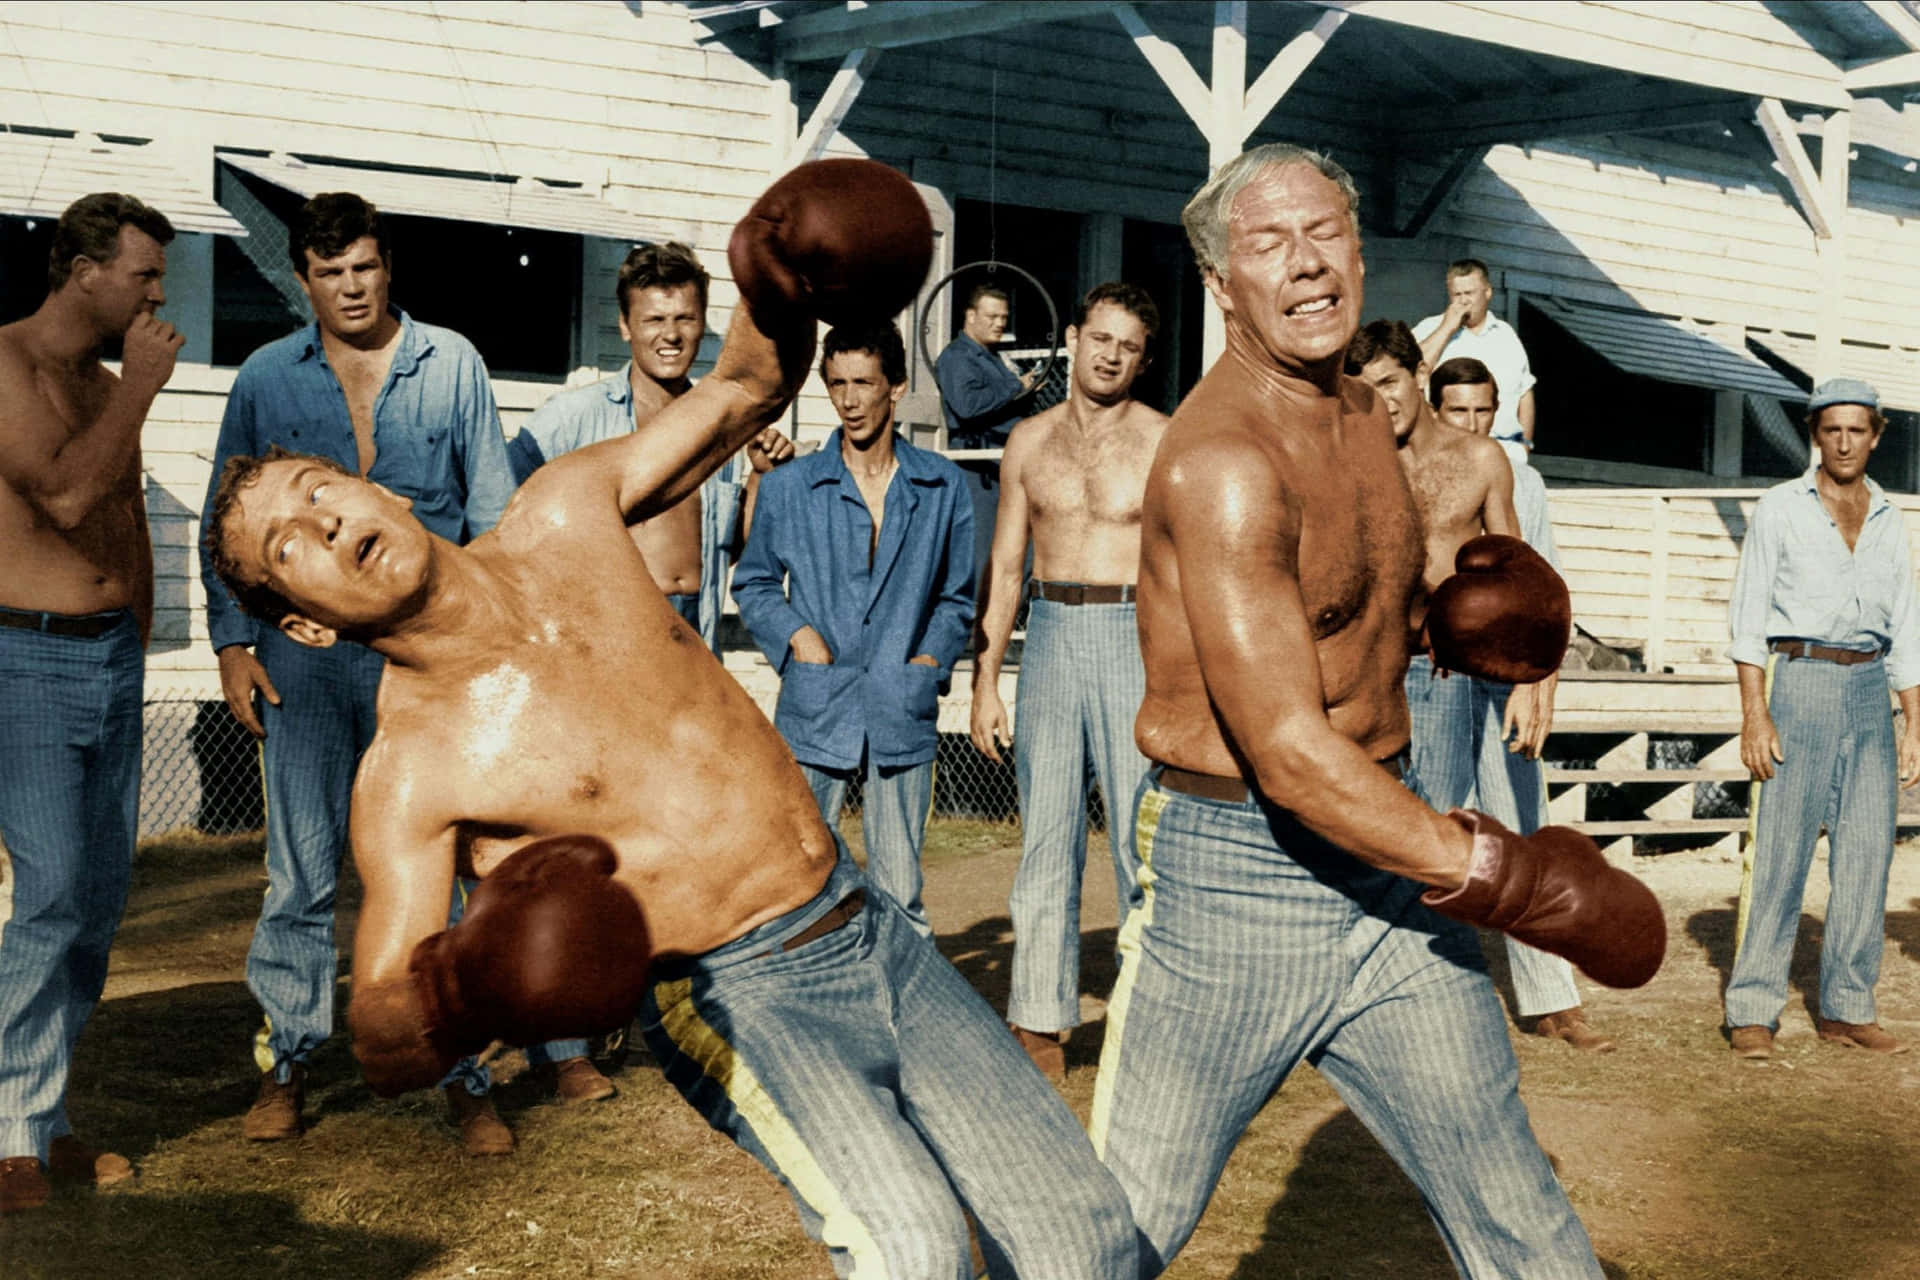 Georgekennedy Is An American Actor Known For His Roles In Films Like 